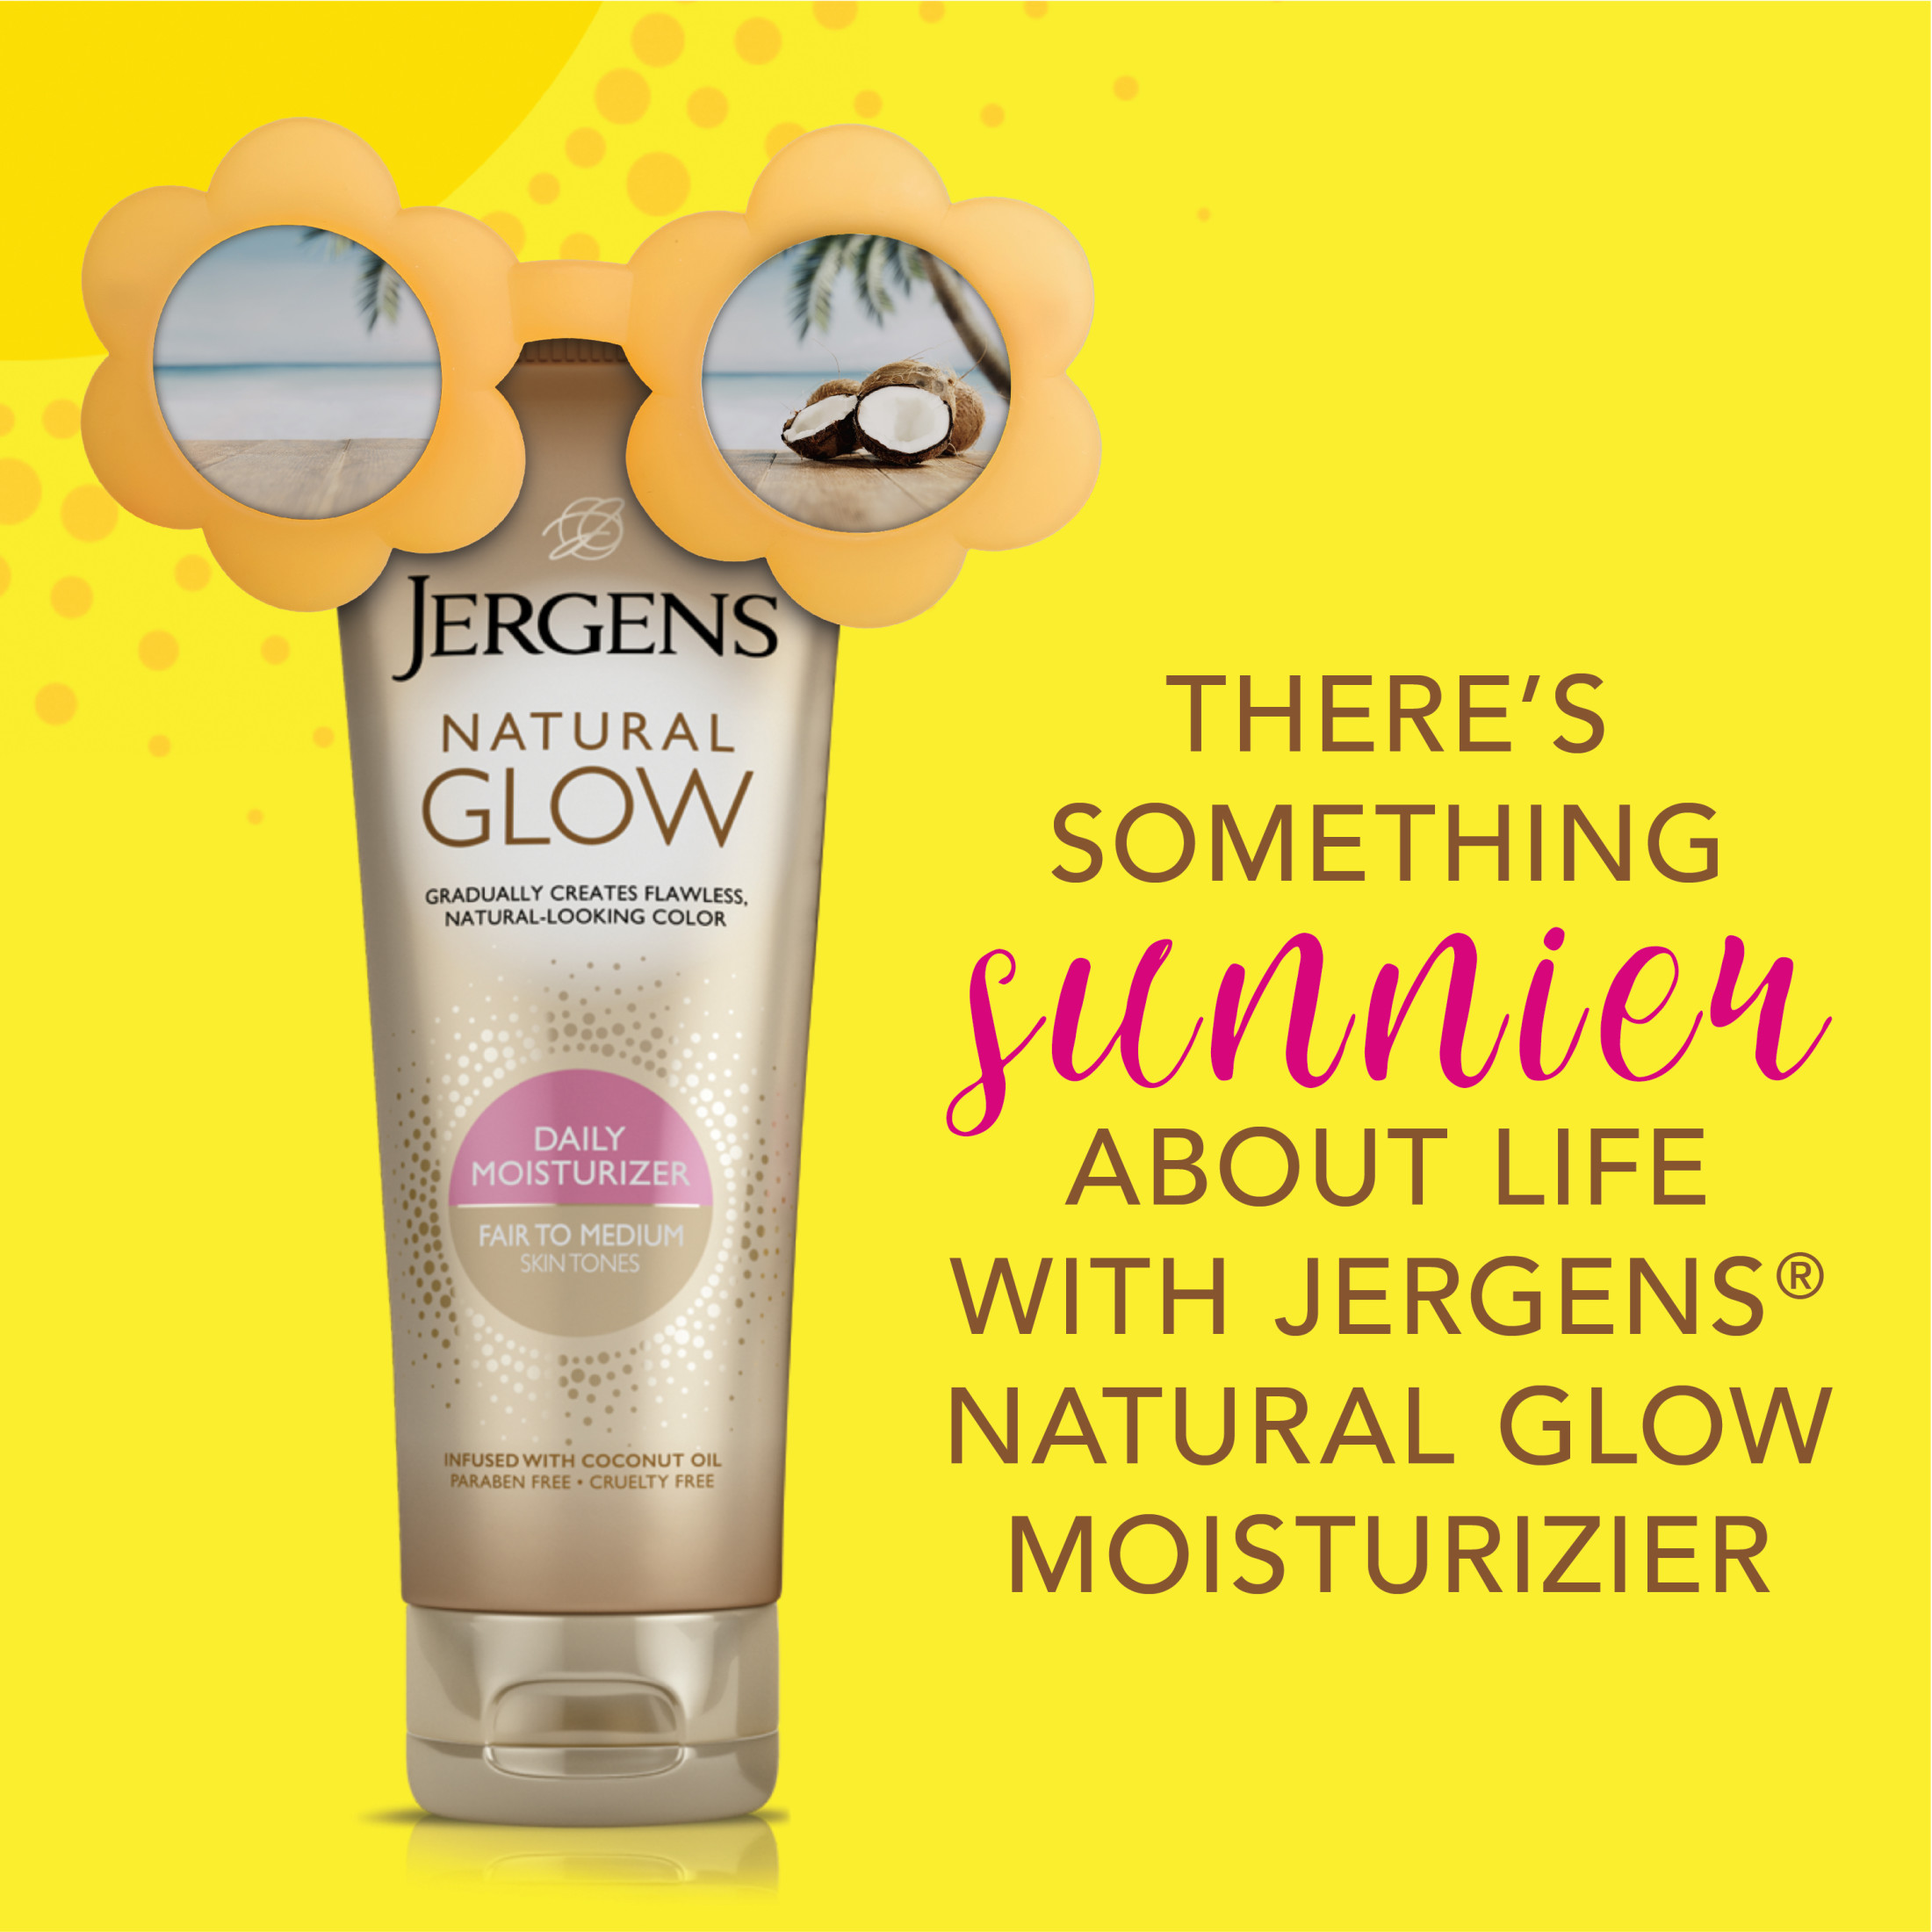 Jergens Natural Glow Self Tanner Lotion, Sunless Tanning Moisturizer for Fair to Medium Skin Tone, 7.5 fl oz - image 5 of 11